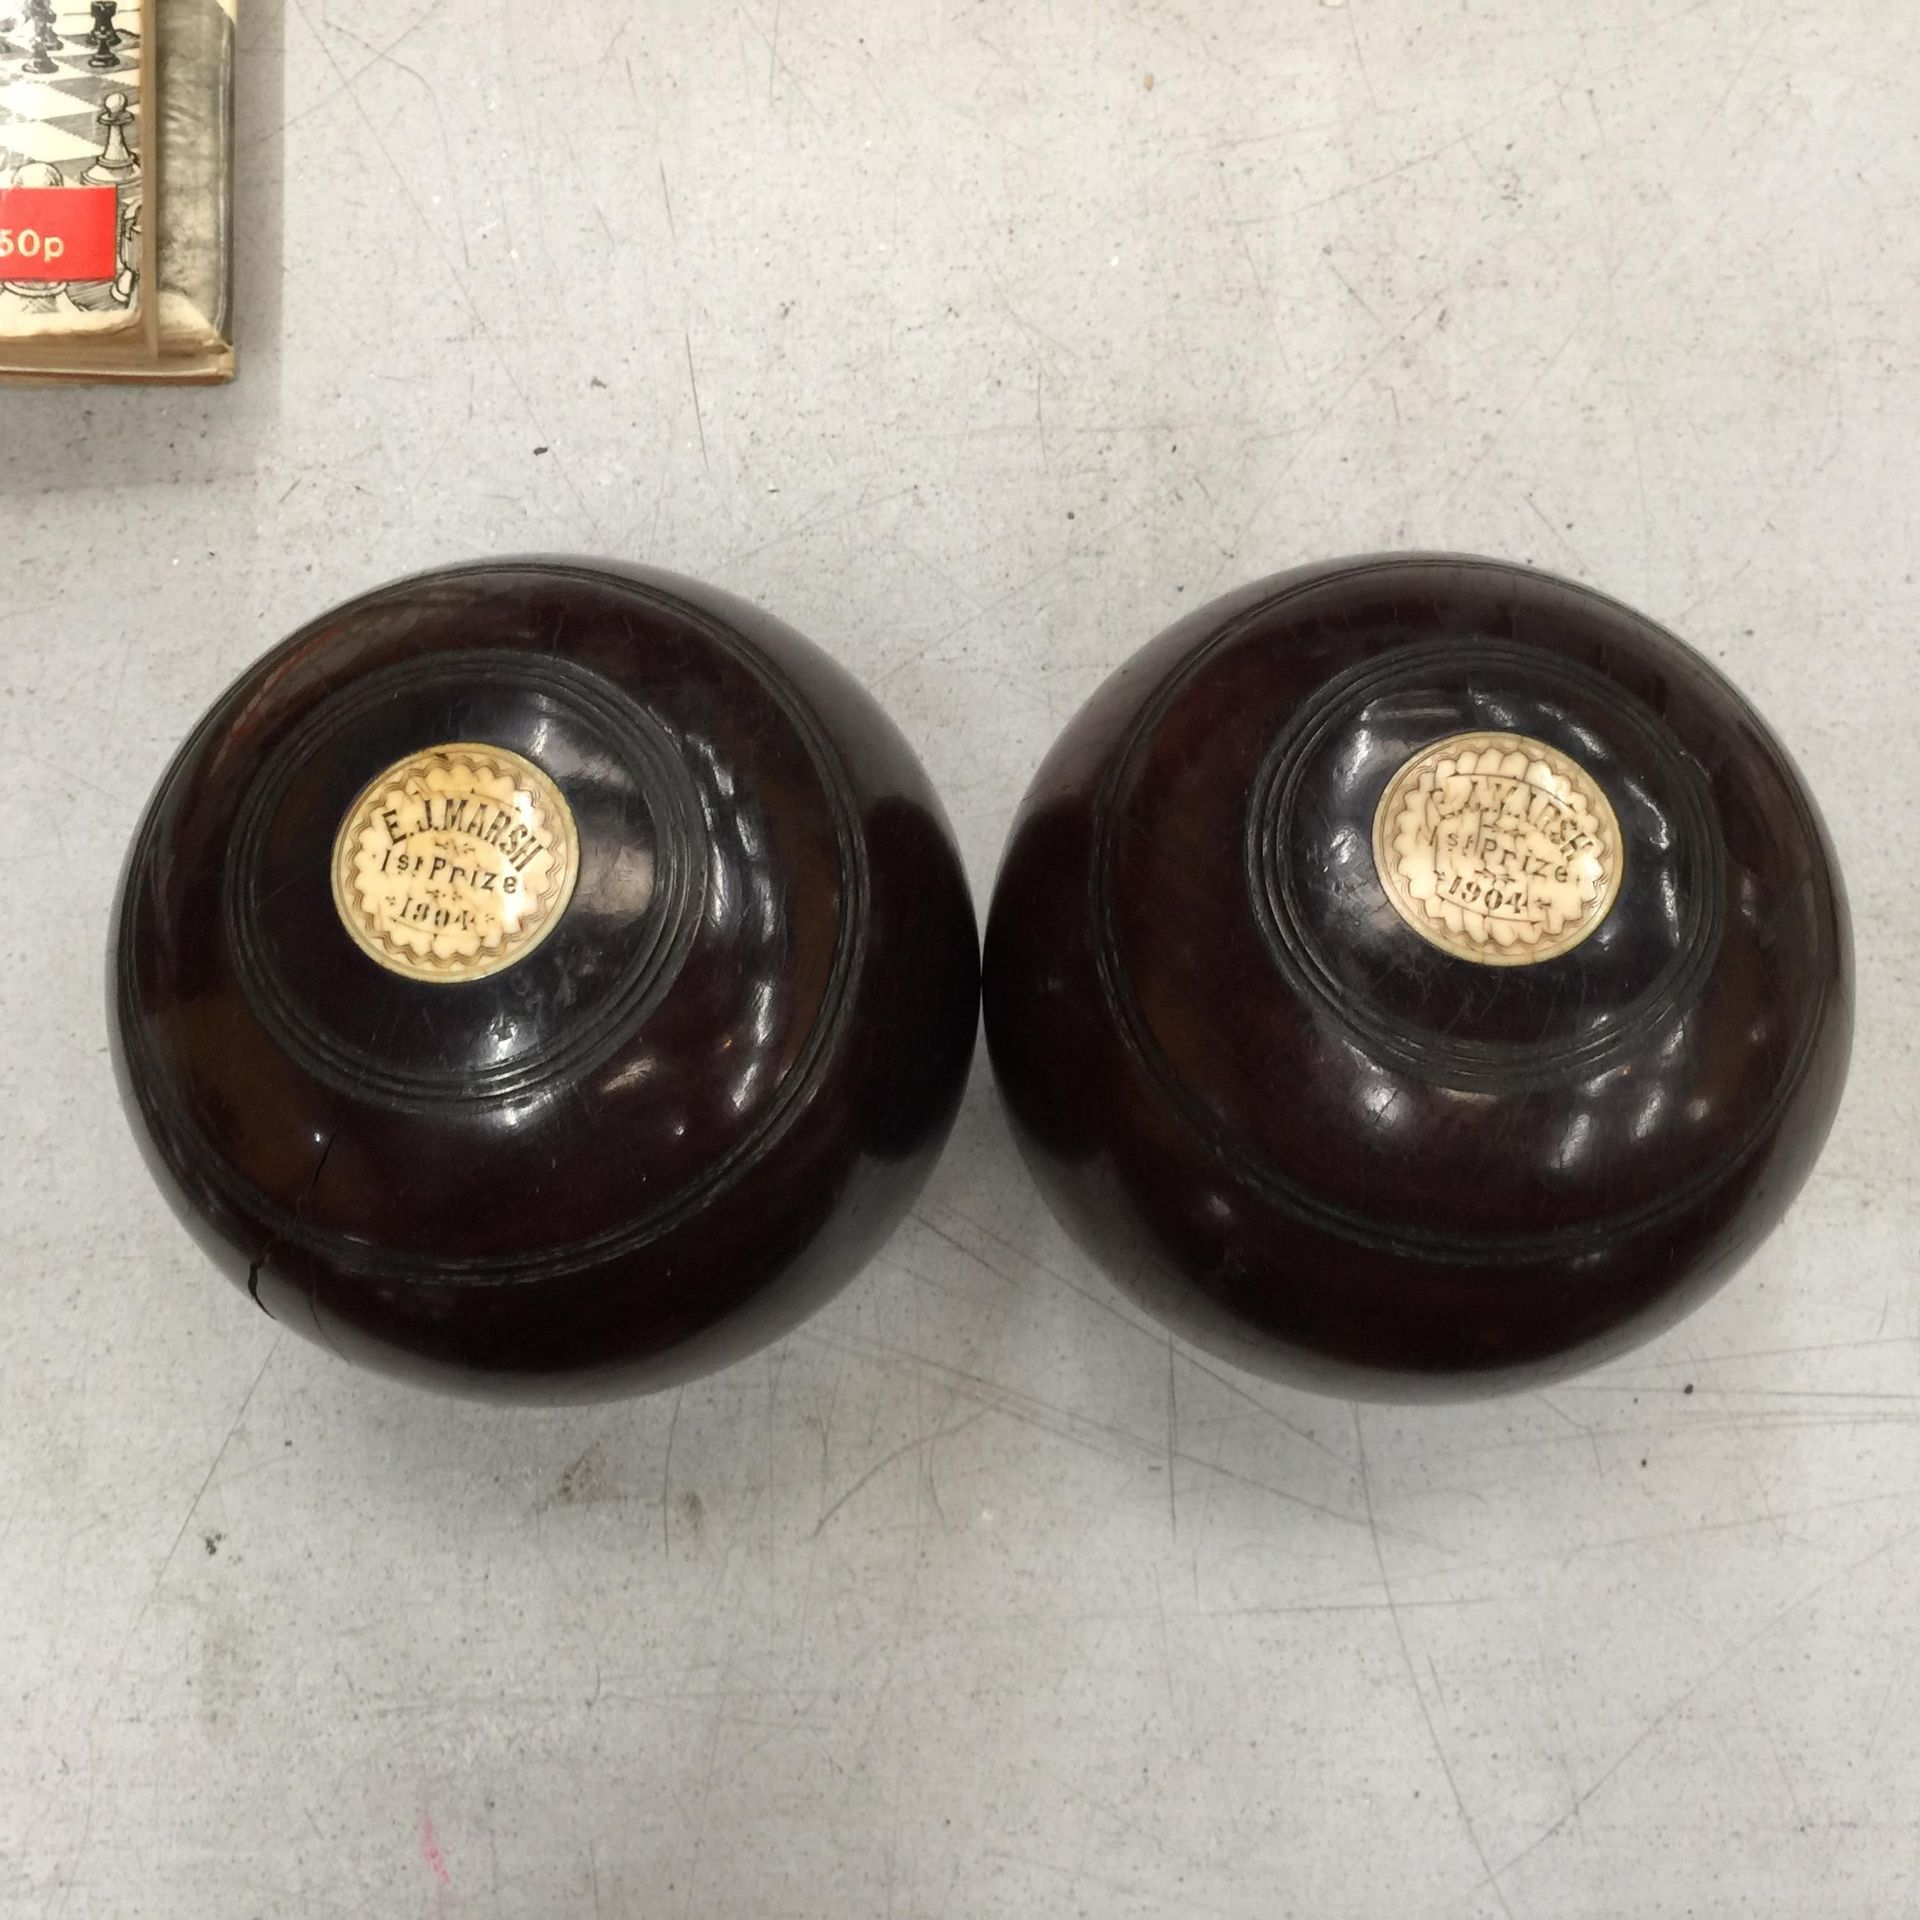 A PAIR OF VINTAGE BOWLS DATED 1894 AND 1904